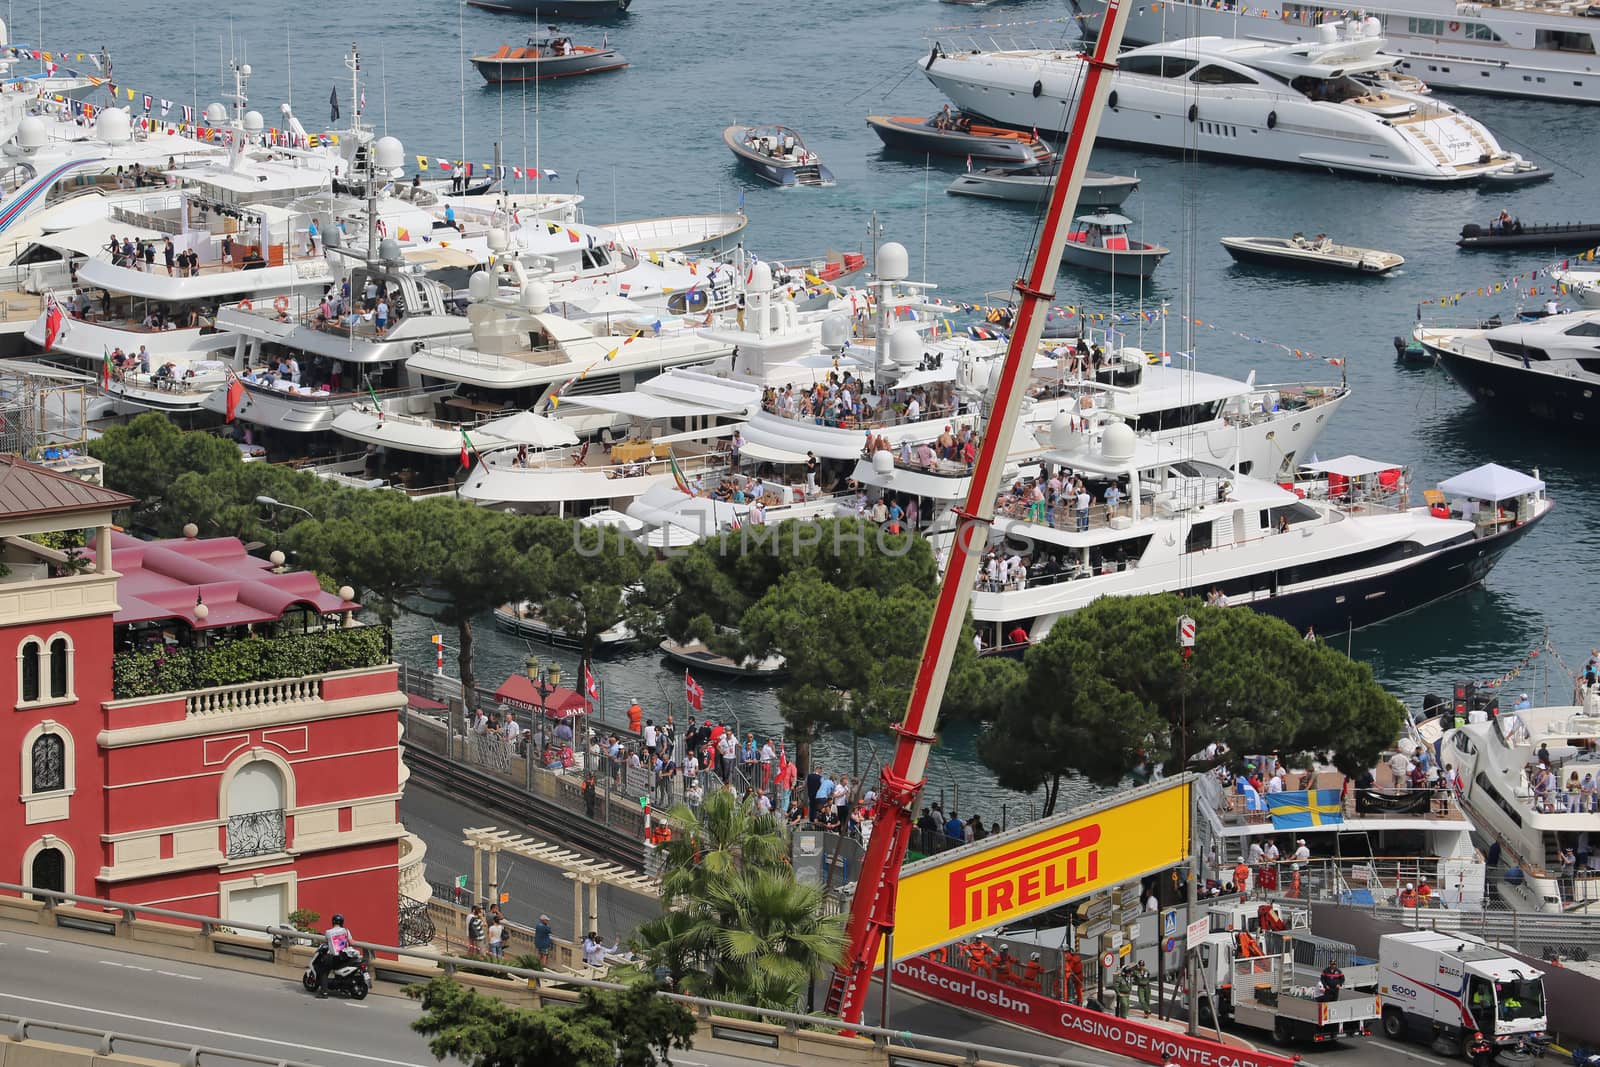 Spectators watch the F1 Monaco Grand Prix 2016 From the Yachts by bensib